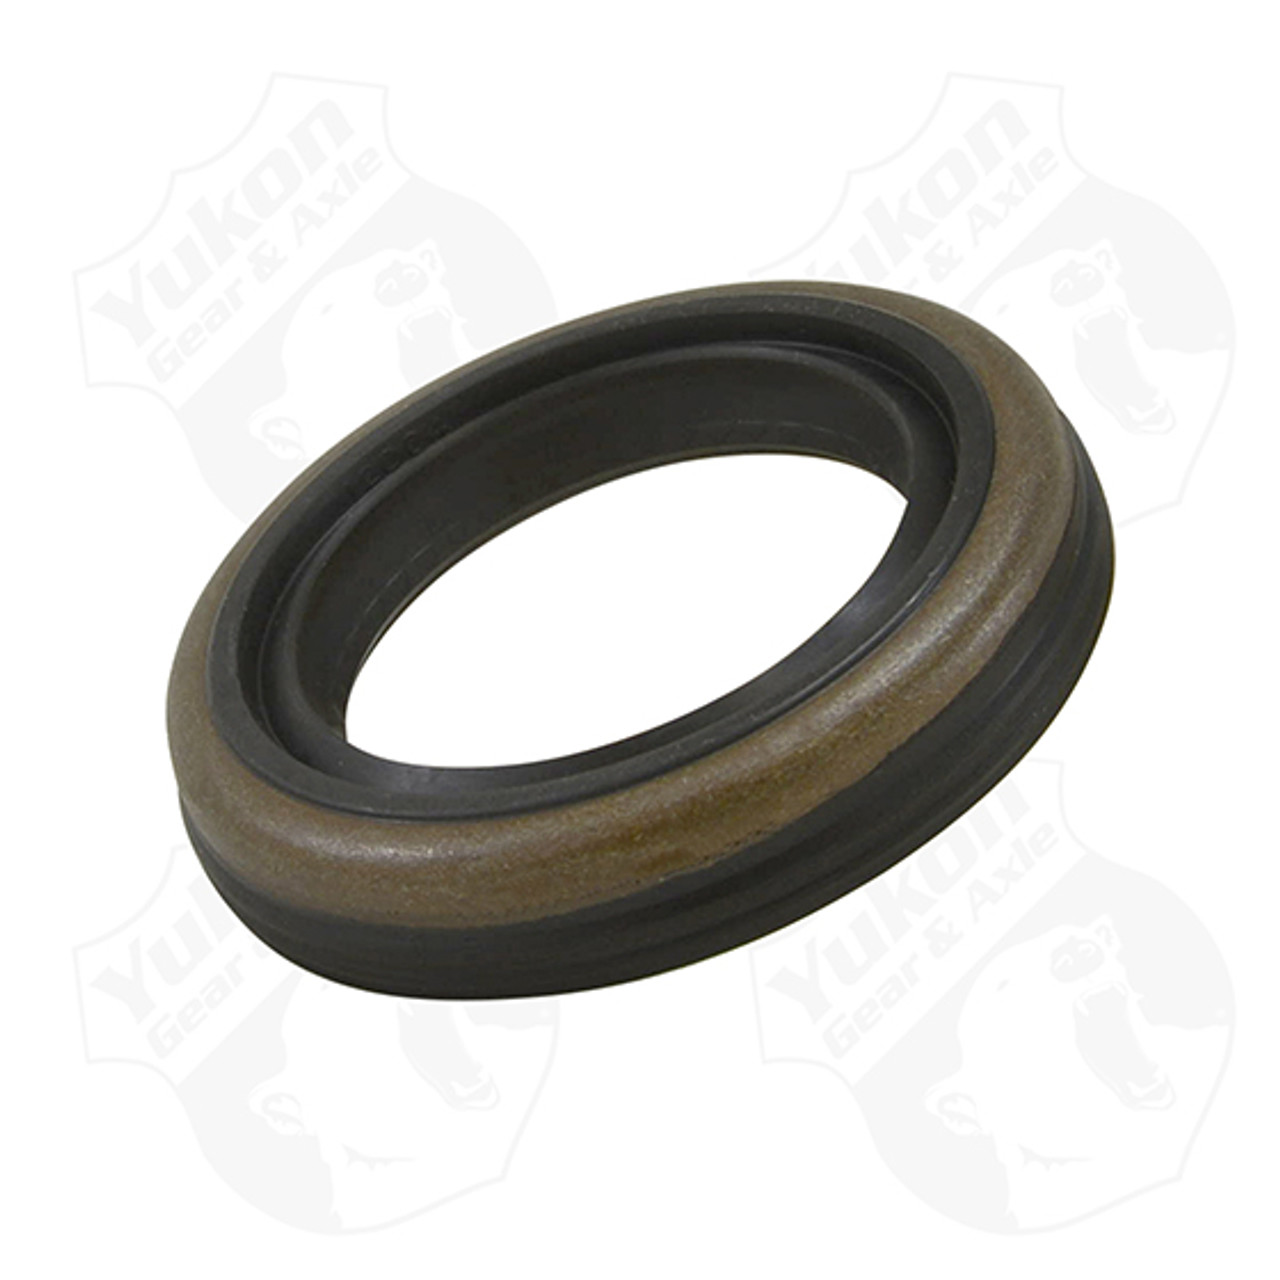 Outer axle seal for set9, fits.470" wide 8.2" Buick, Oldsmobile, and Pontiac